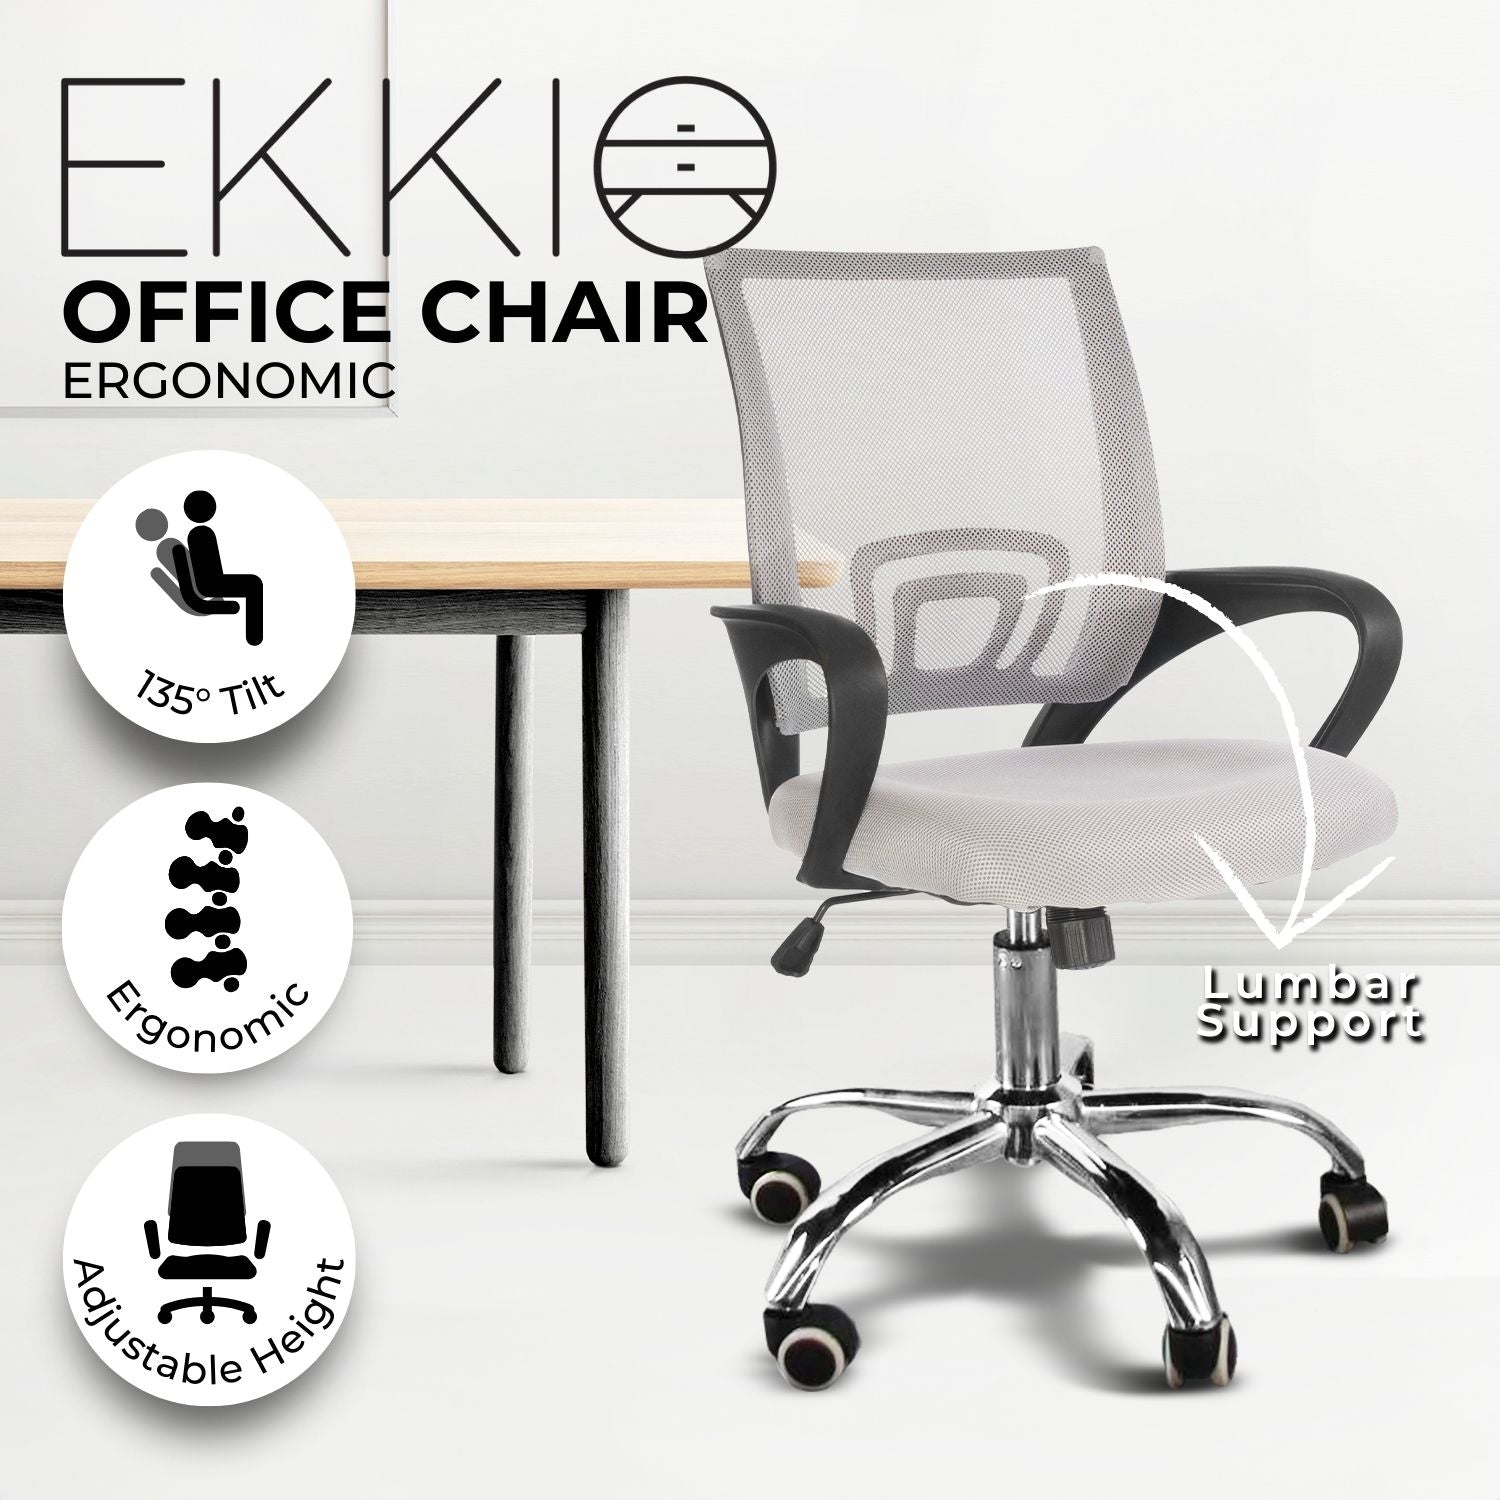 EKKIO Ergonomic Office Chair with Breathable Mesh Design and Lumbar Back Support (Grey)